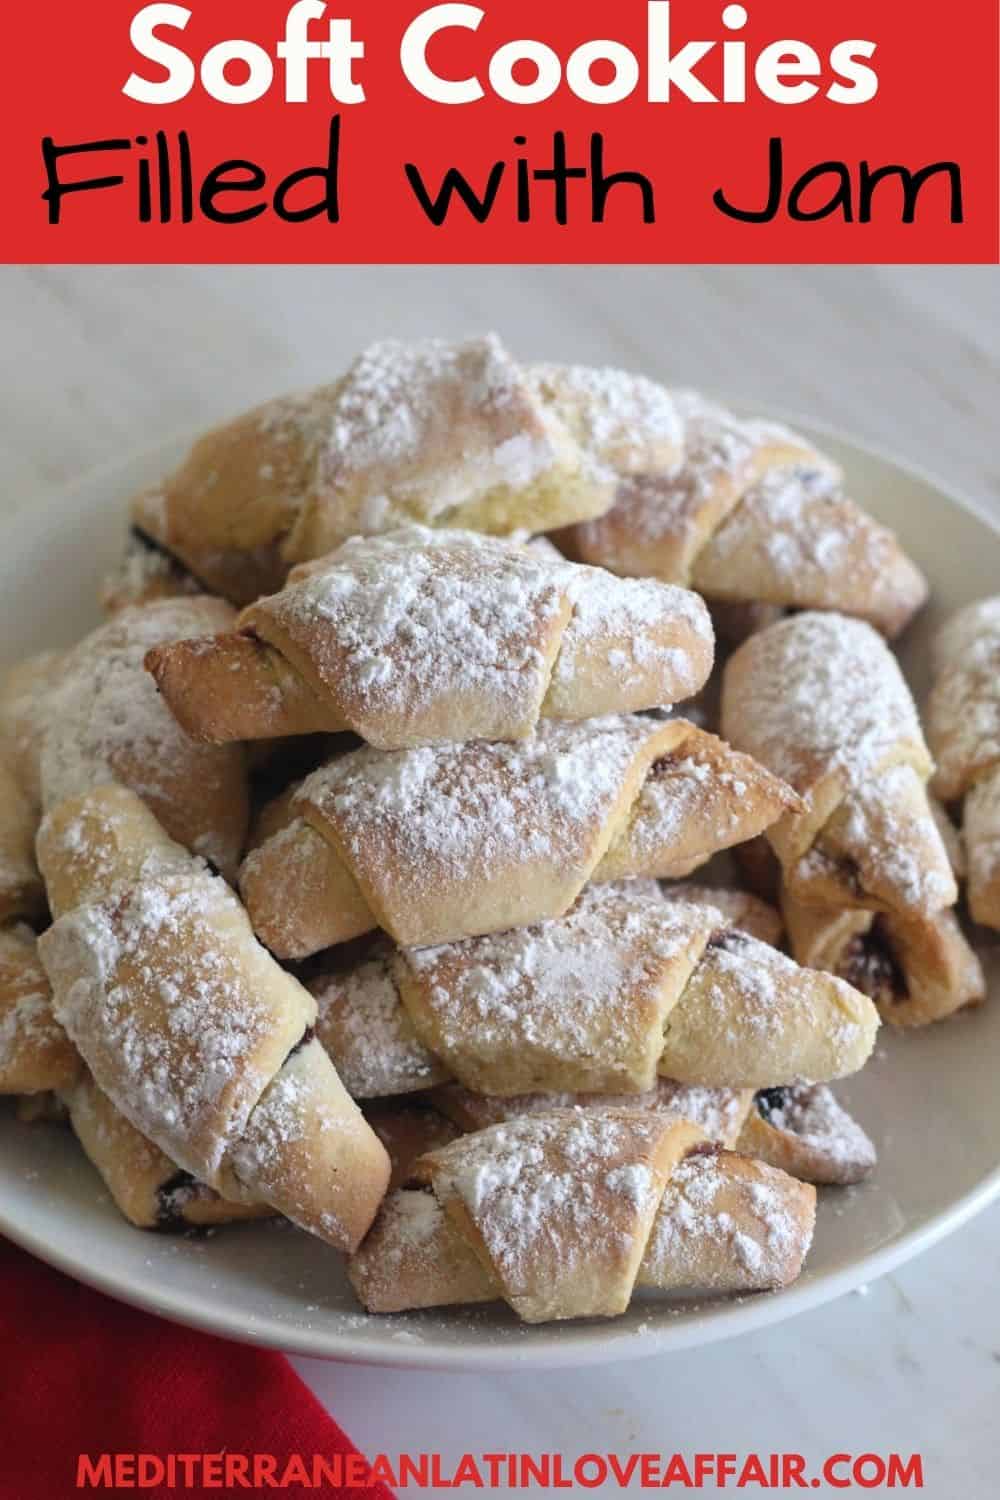 An image prepared for Pinterest. It shows a pictures of the cookies on a plate, cookies are dusted with confectioner's sugar. On top of the picture there's a title bar and at the bottom you see the website link